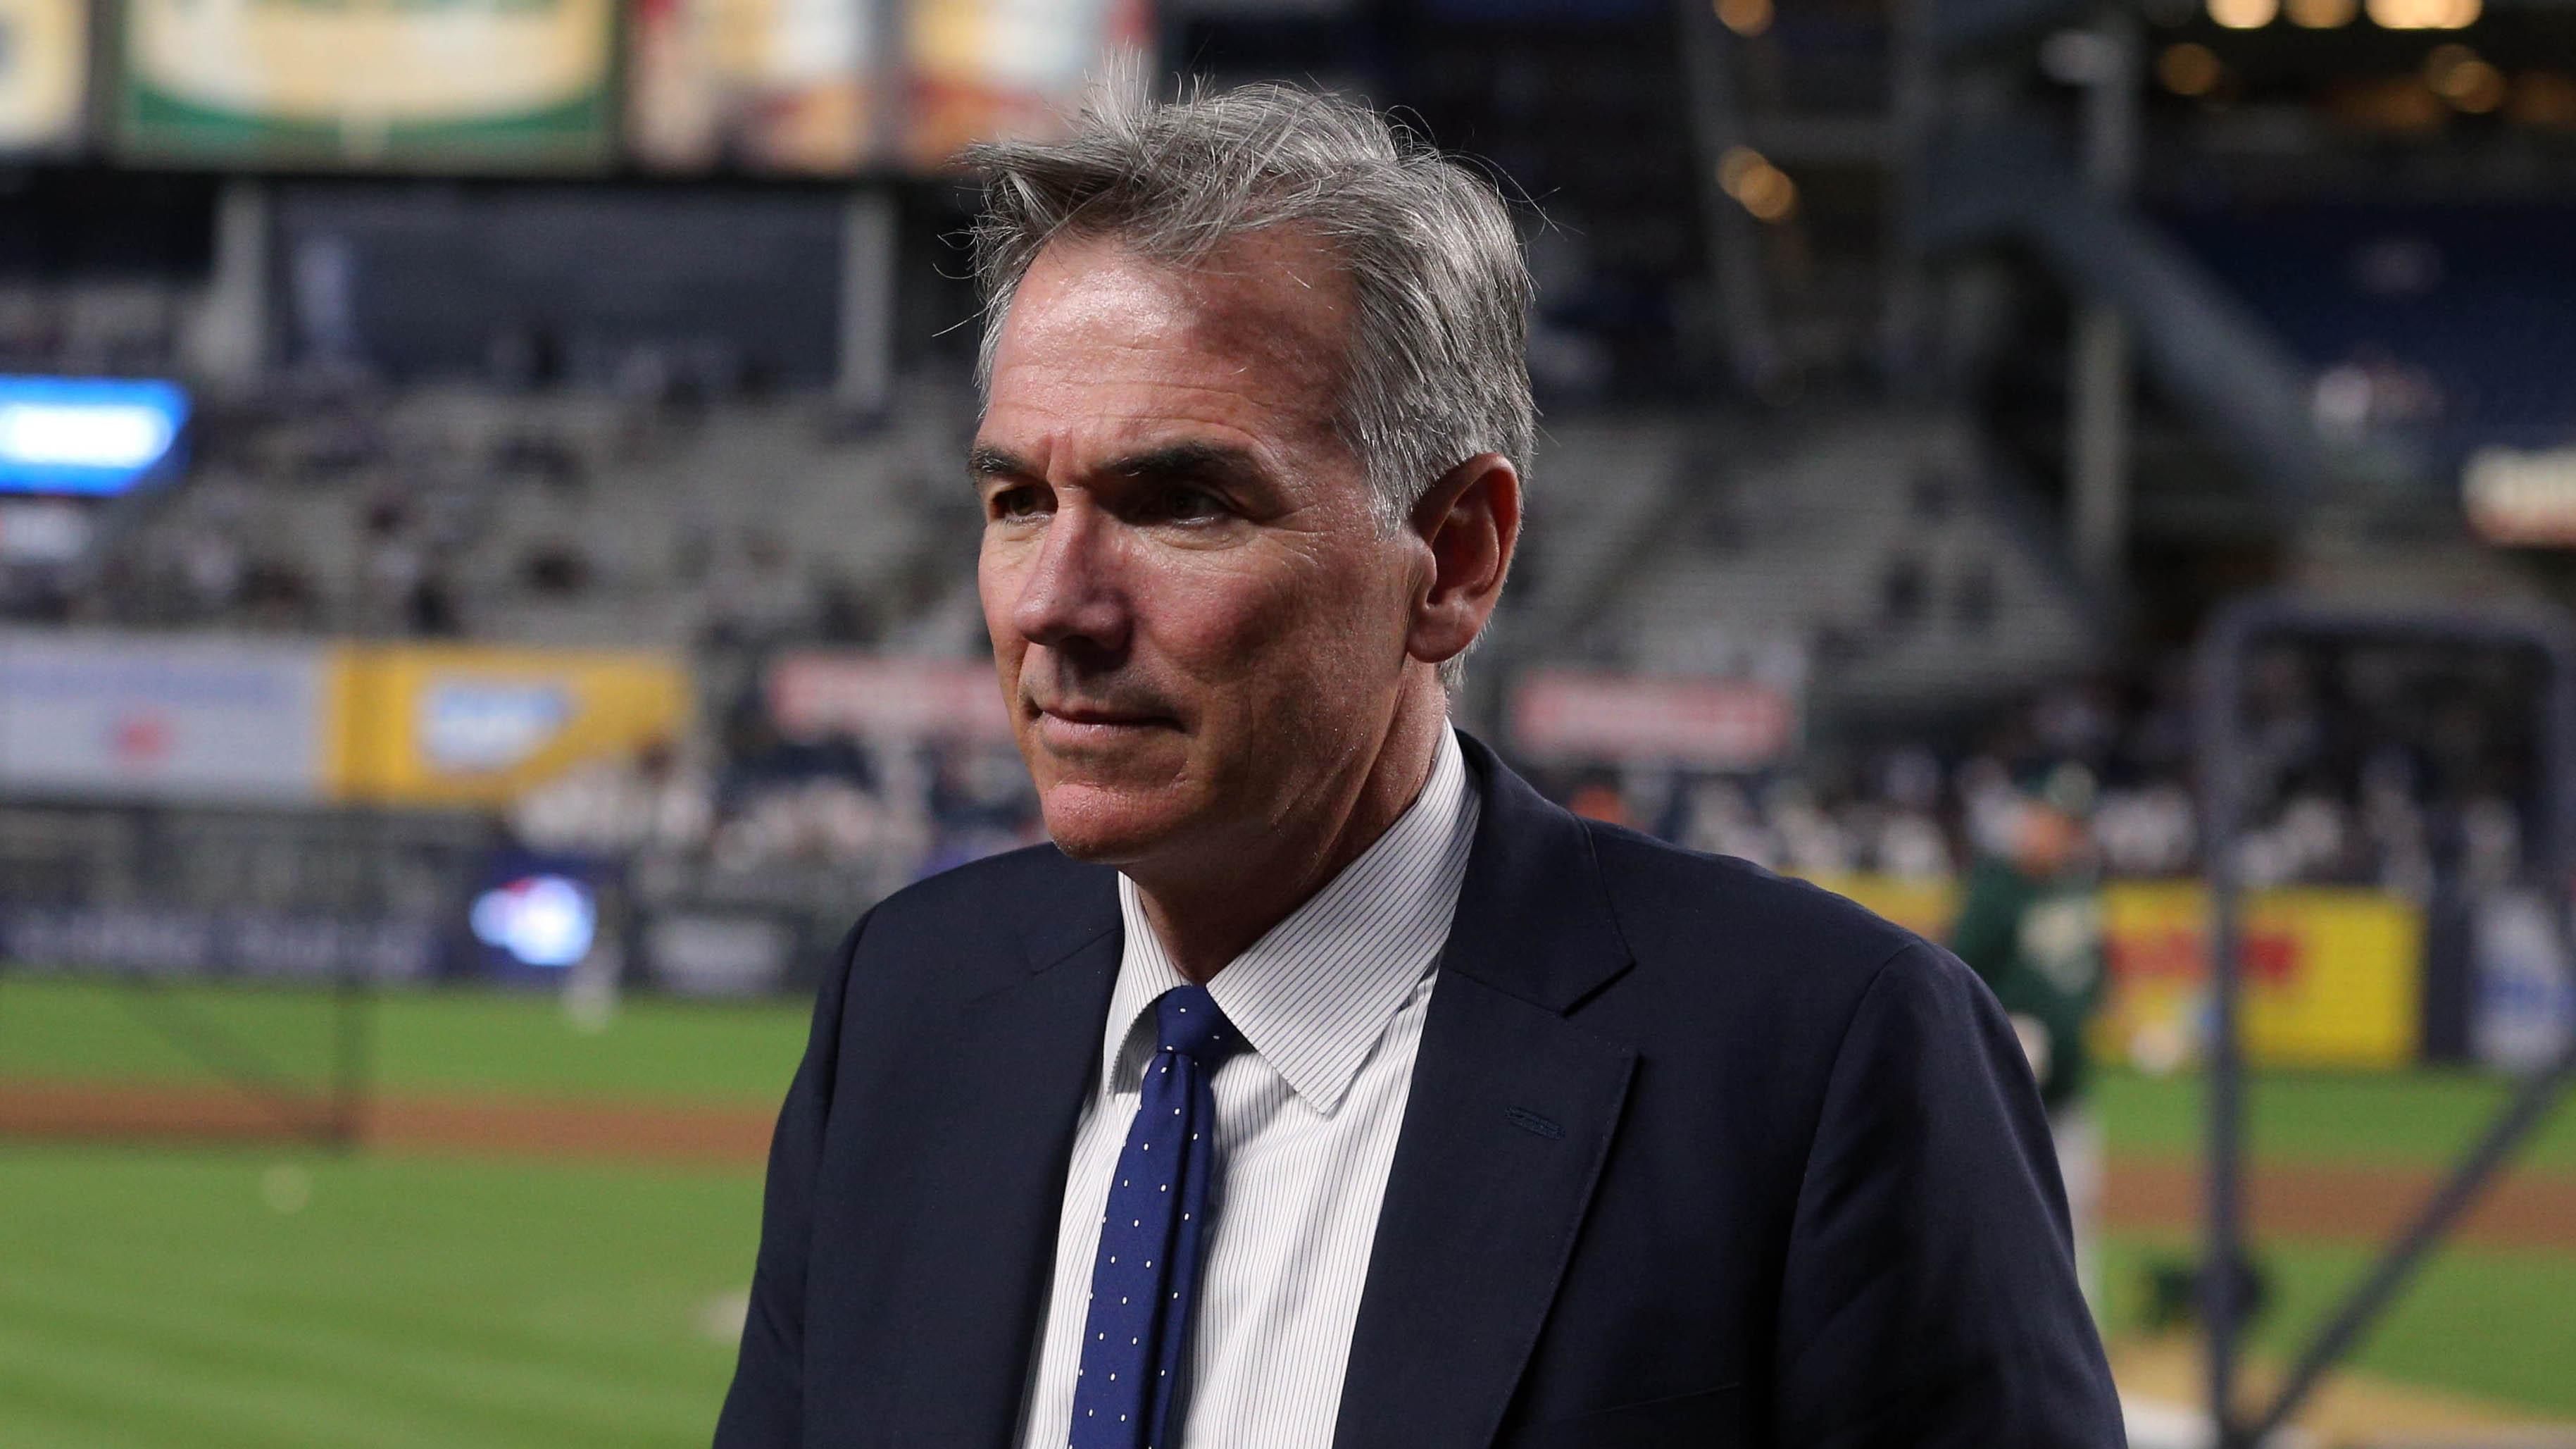 Bronx, NY, USA; Oakland Athletics vice president of baseball operations Billy Beane walks onto the field before the game against the New York Yankees in the 2018 American League wild card playoff baseball game at Yankee Stadium. / Brad Penner-USA TODAY Sports